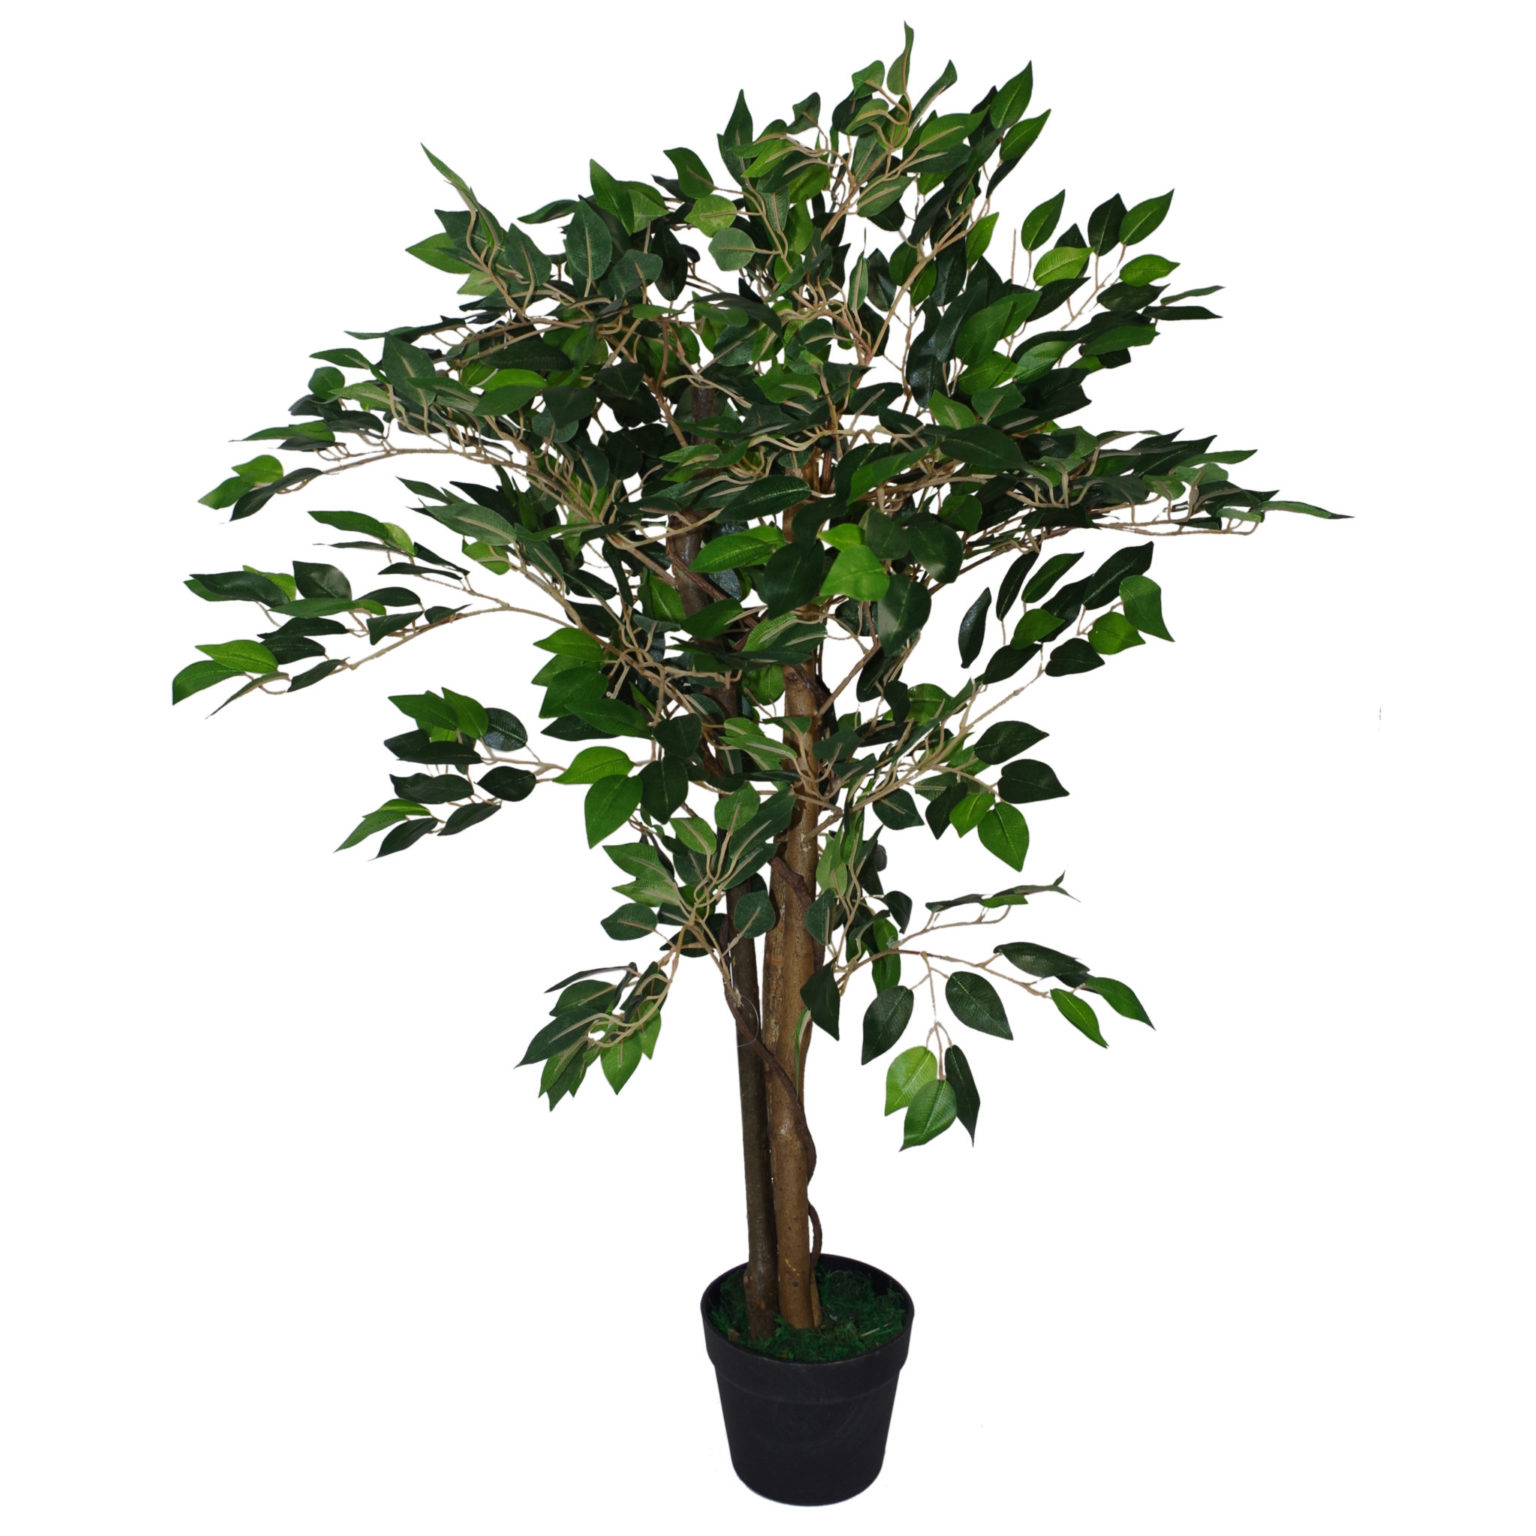 UK Supplier of Stunning Artificial Plants, Trees and Toipary